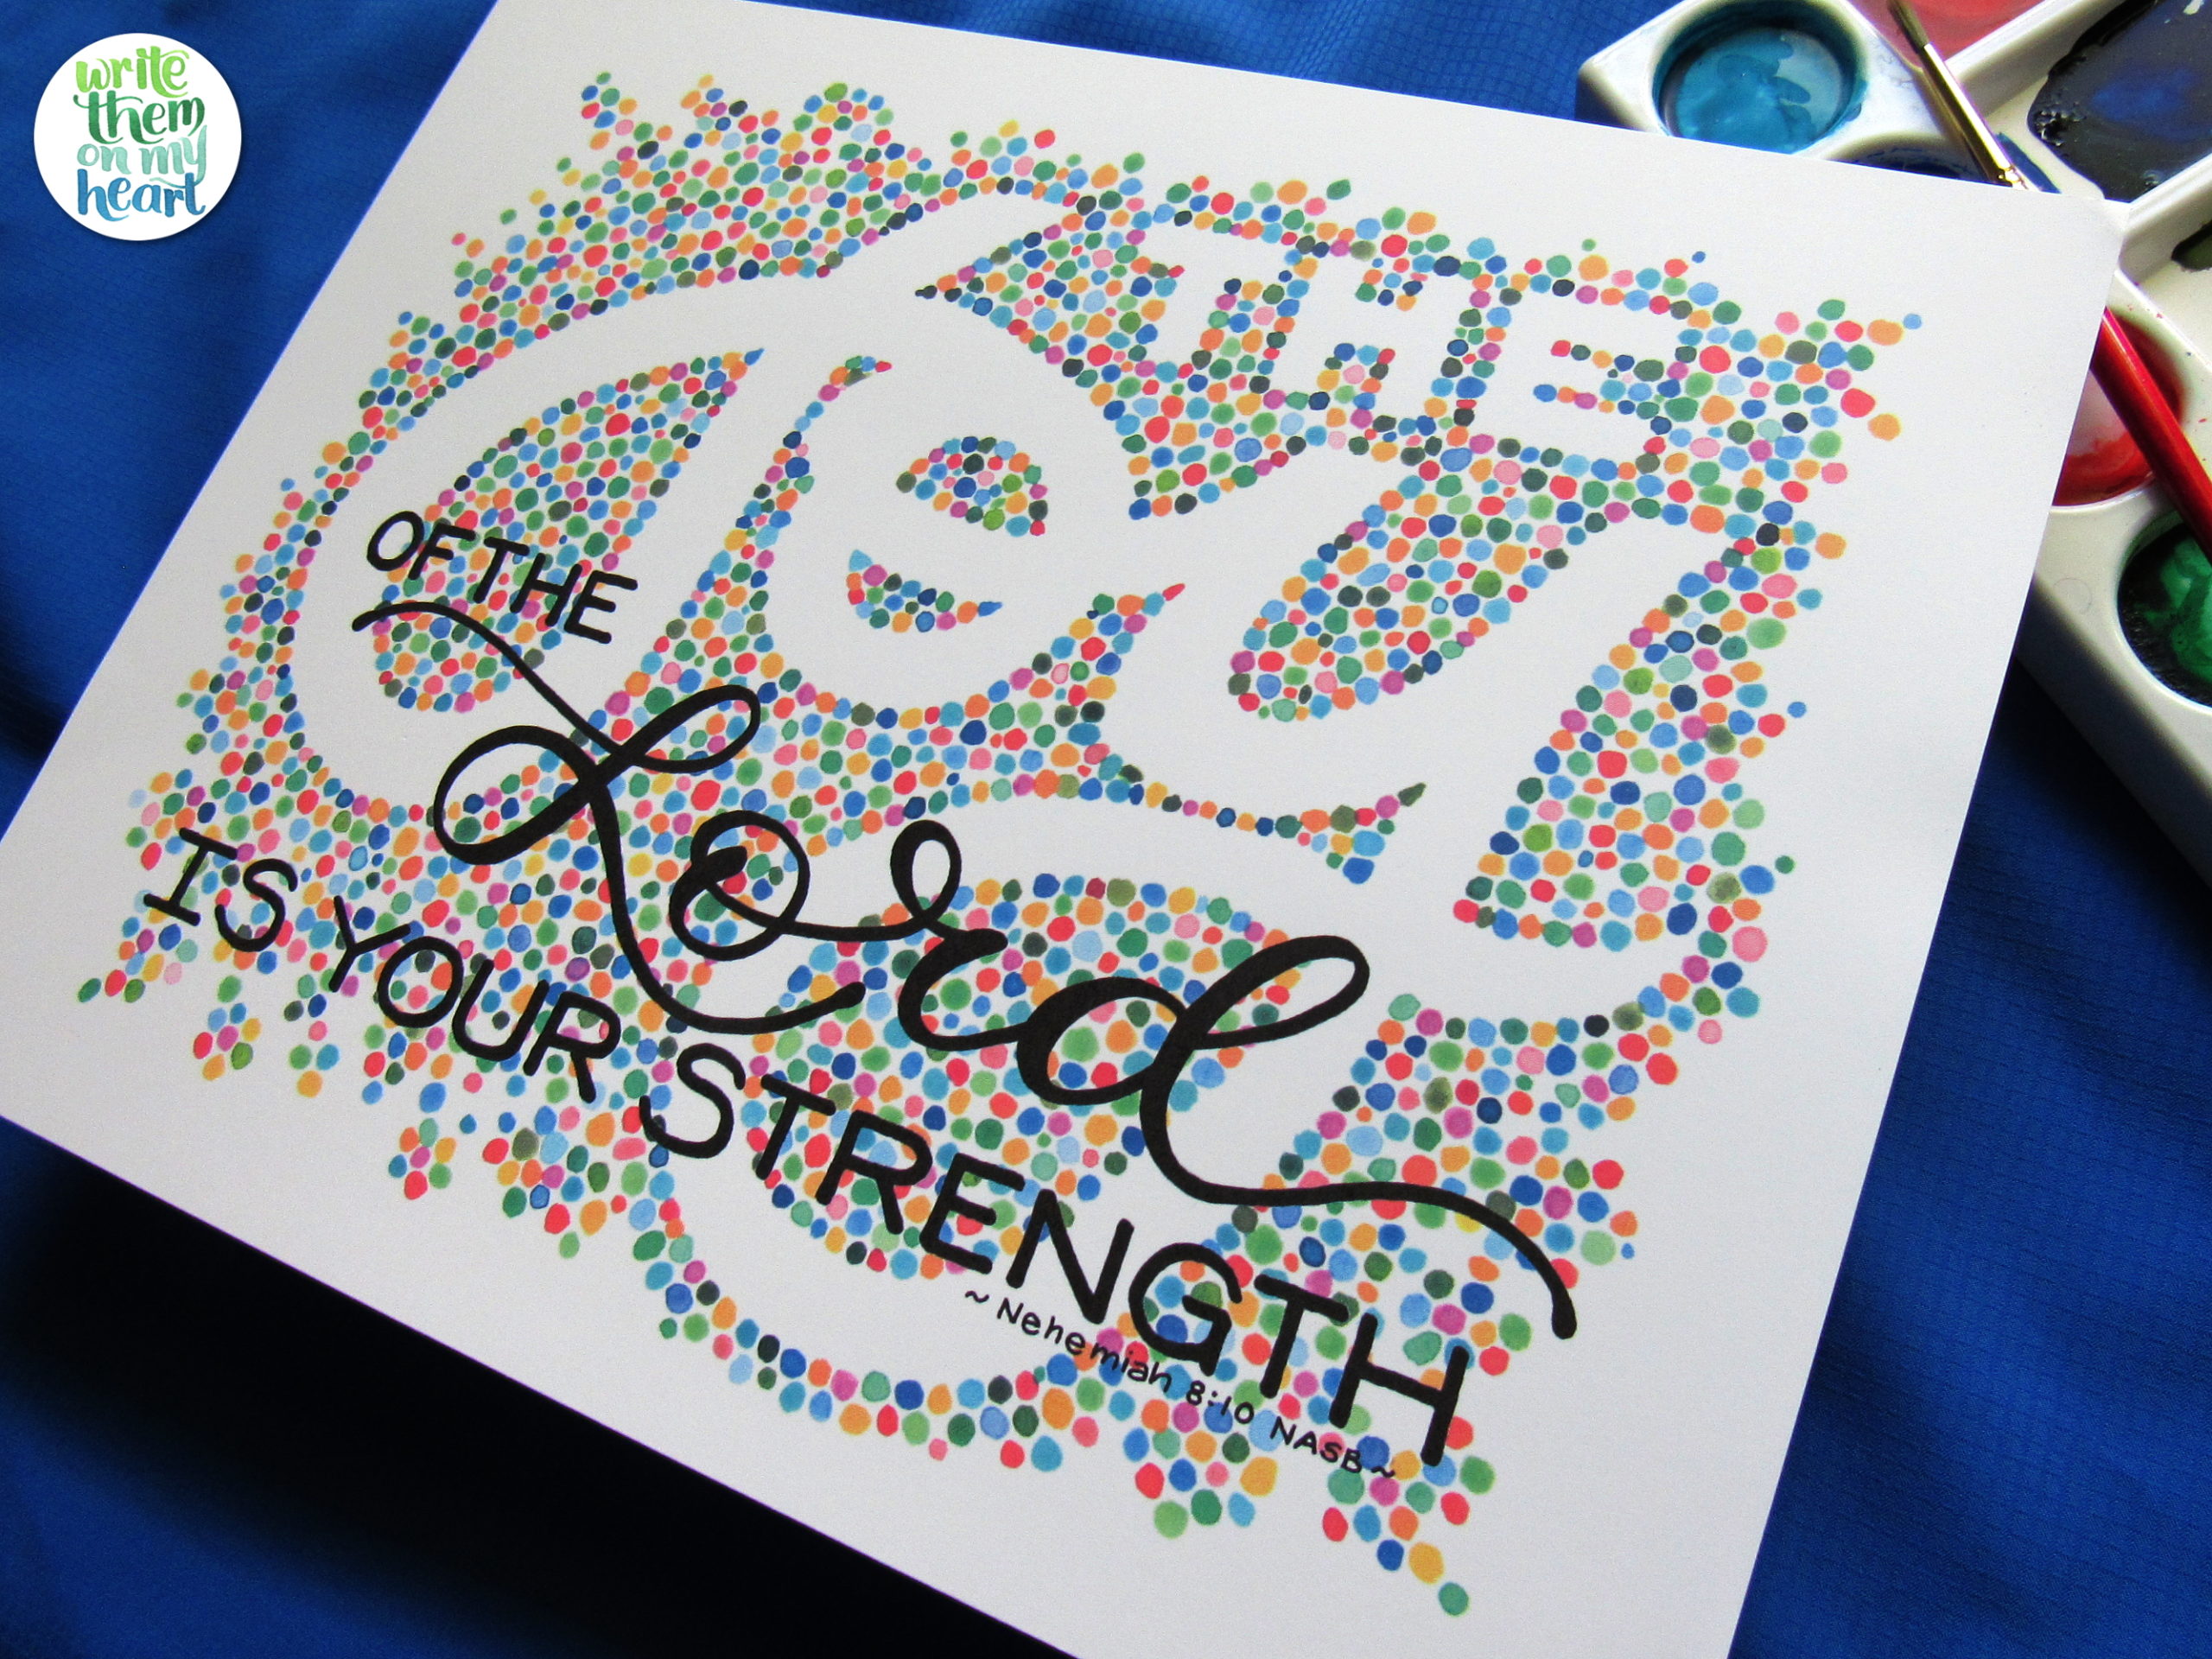 Nehemiah 8:10 Scripture Art - The joy of the Lord is your strength